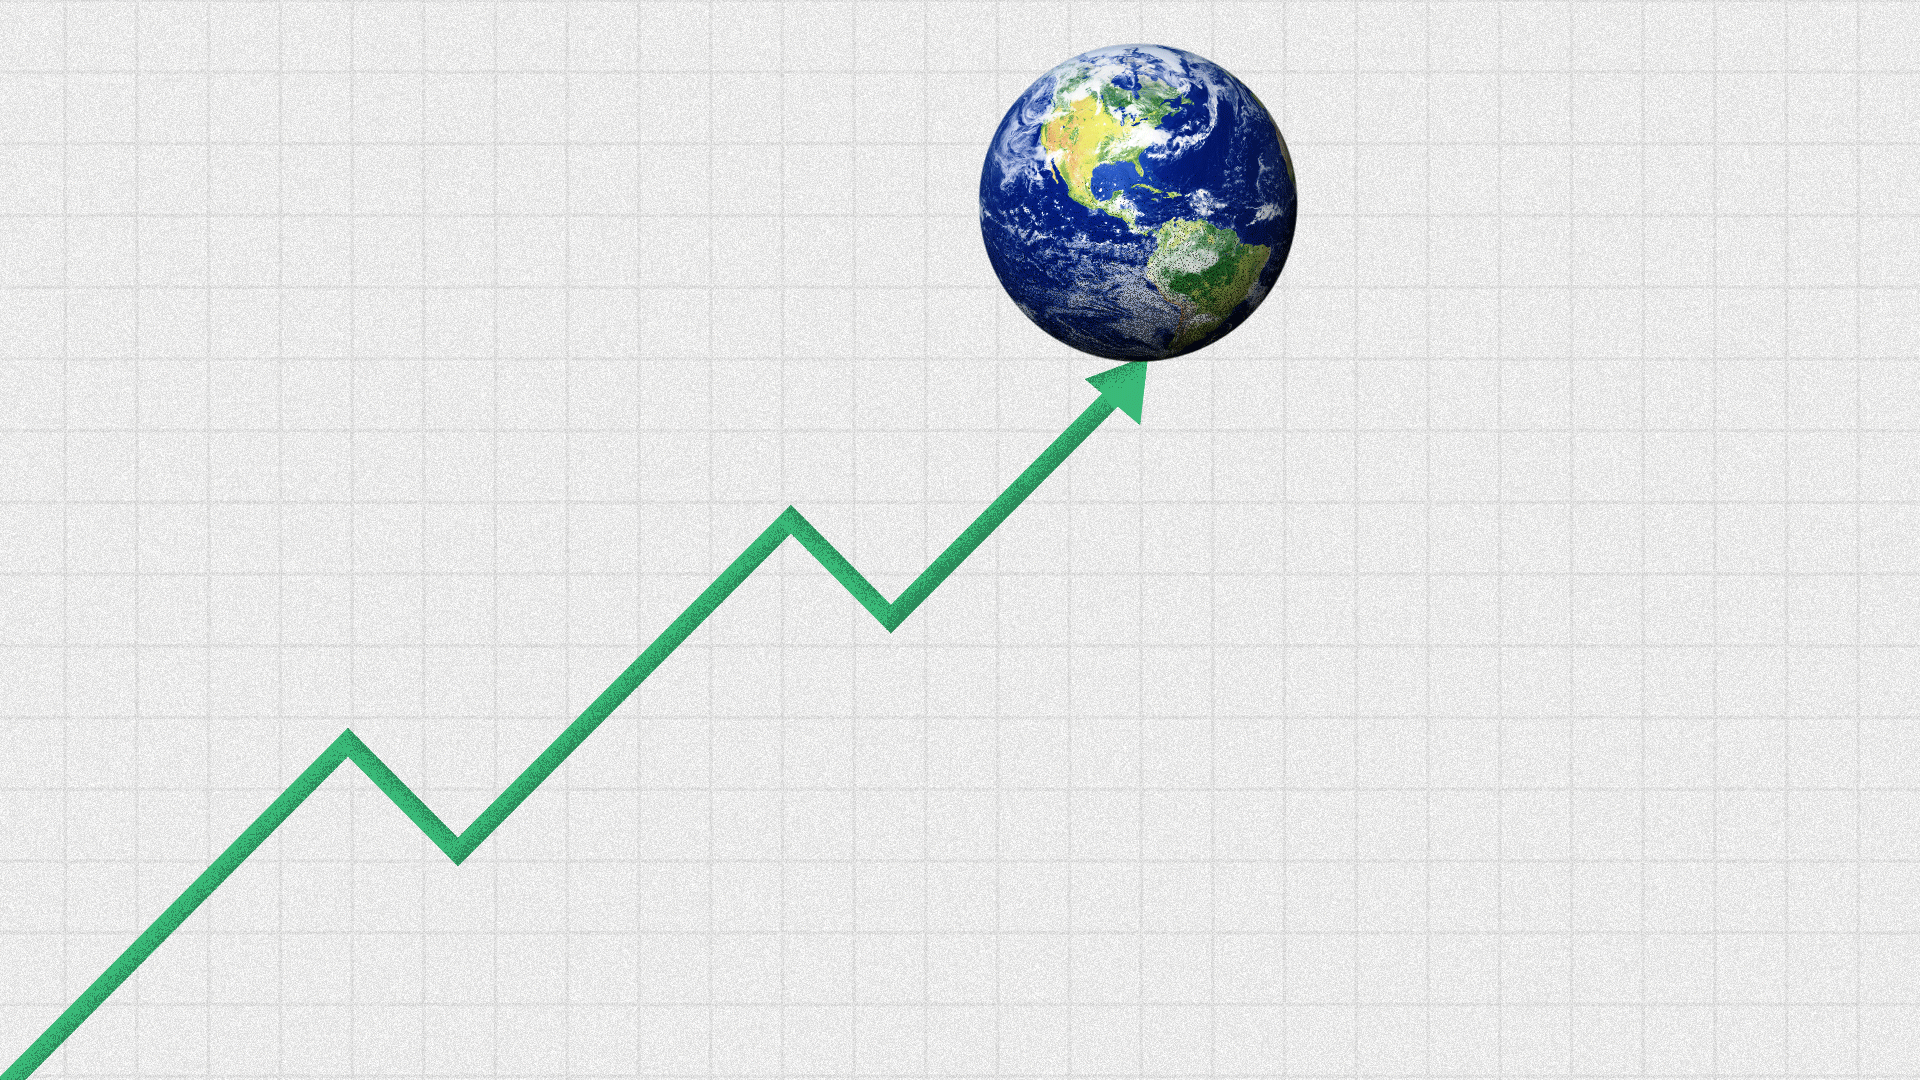 Illustration of an upward trending arrow with the Earth teetering on the edge. 